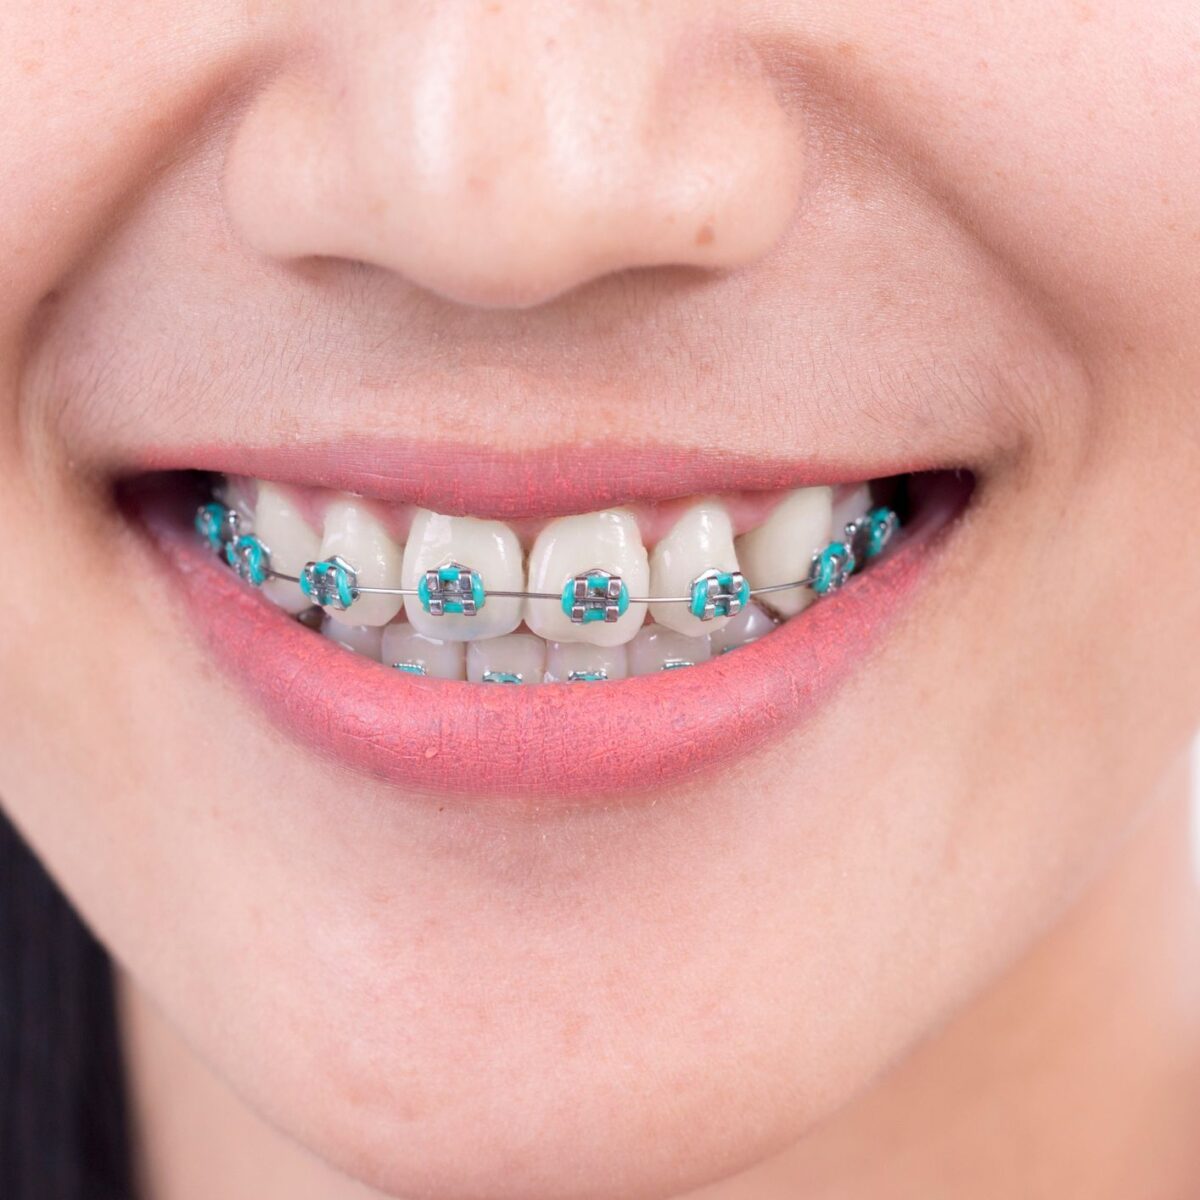 How Long Does It Take to Become an Orthodontist?